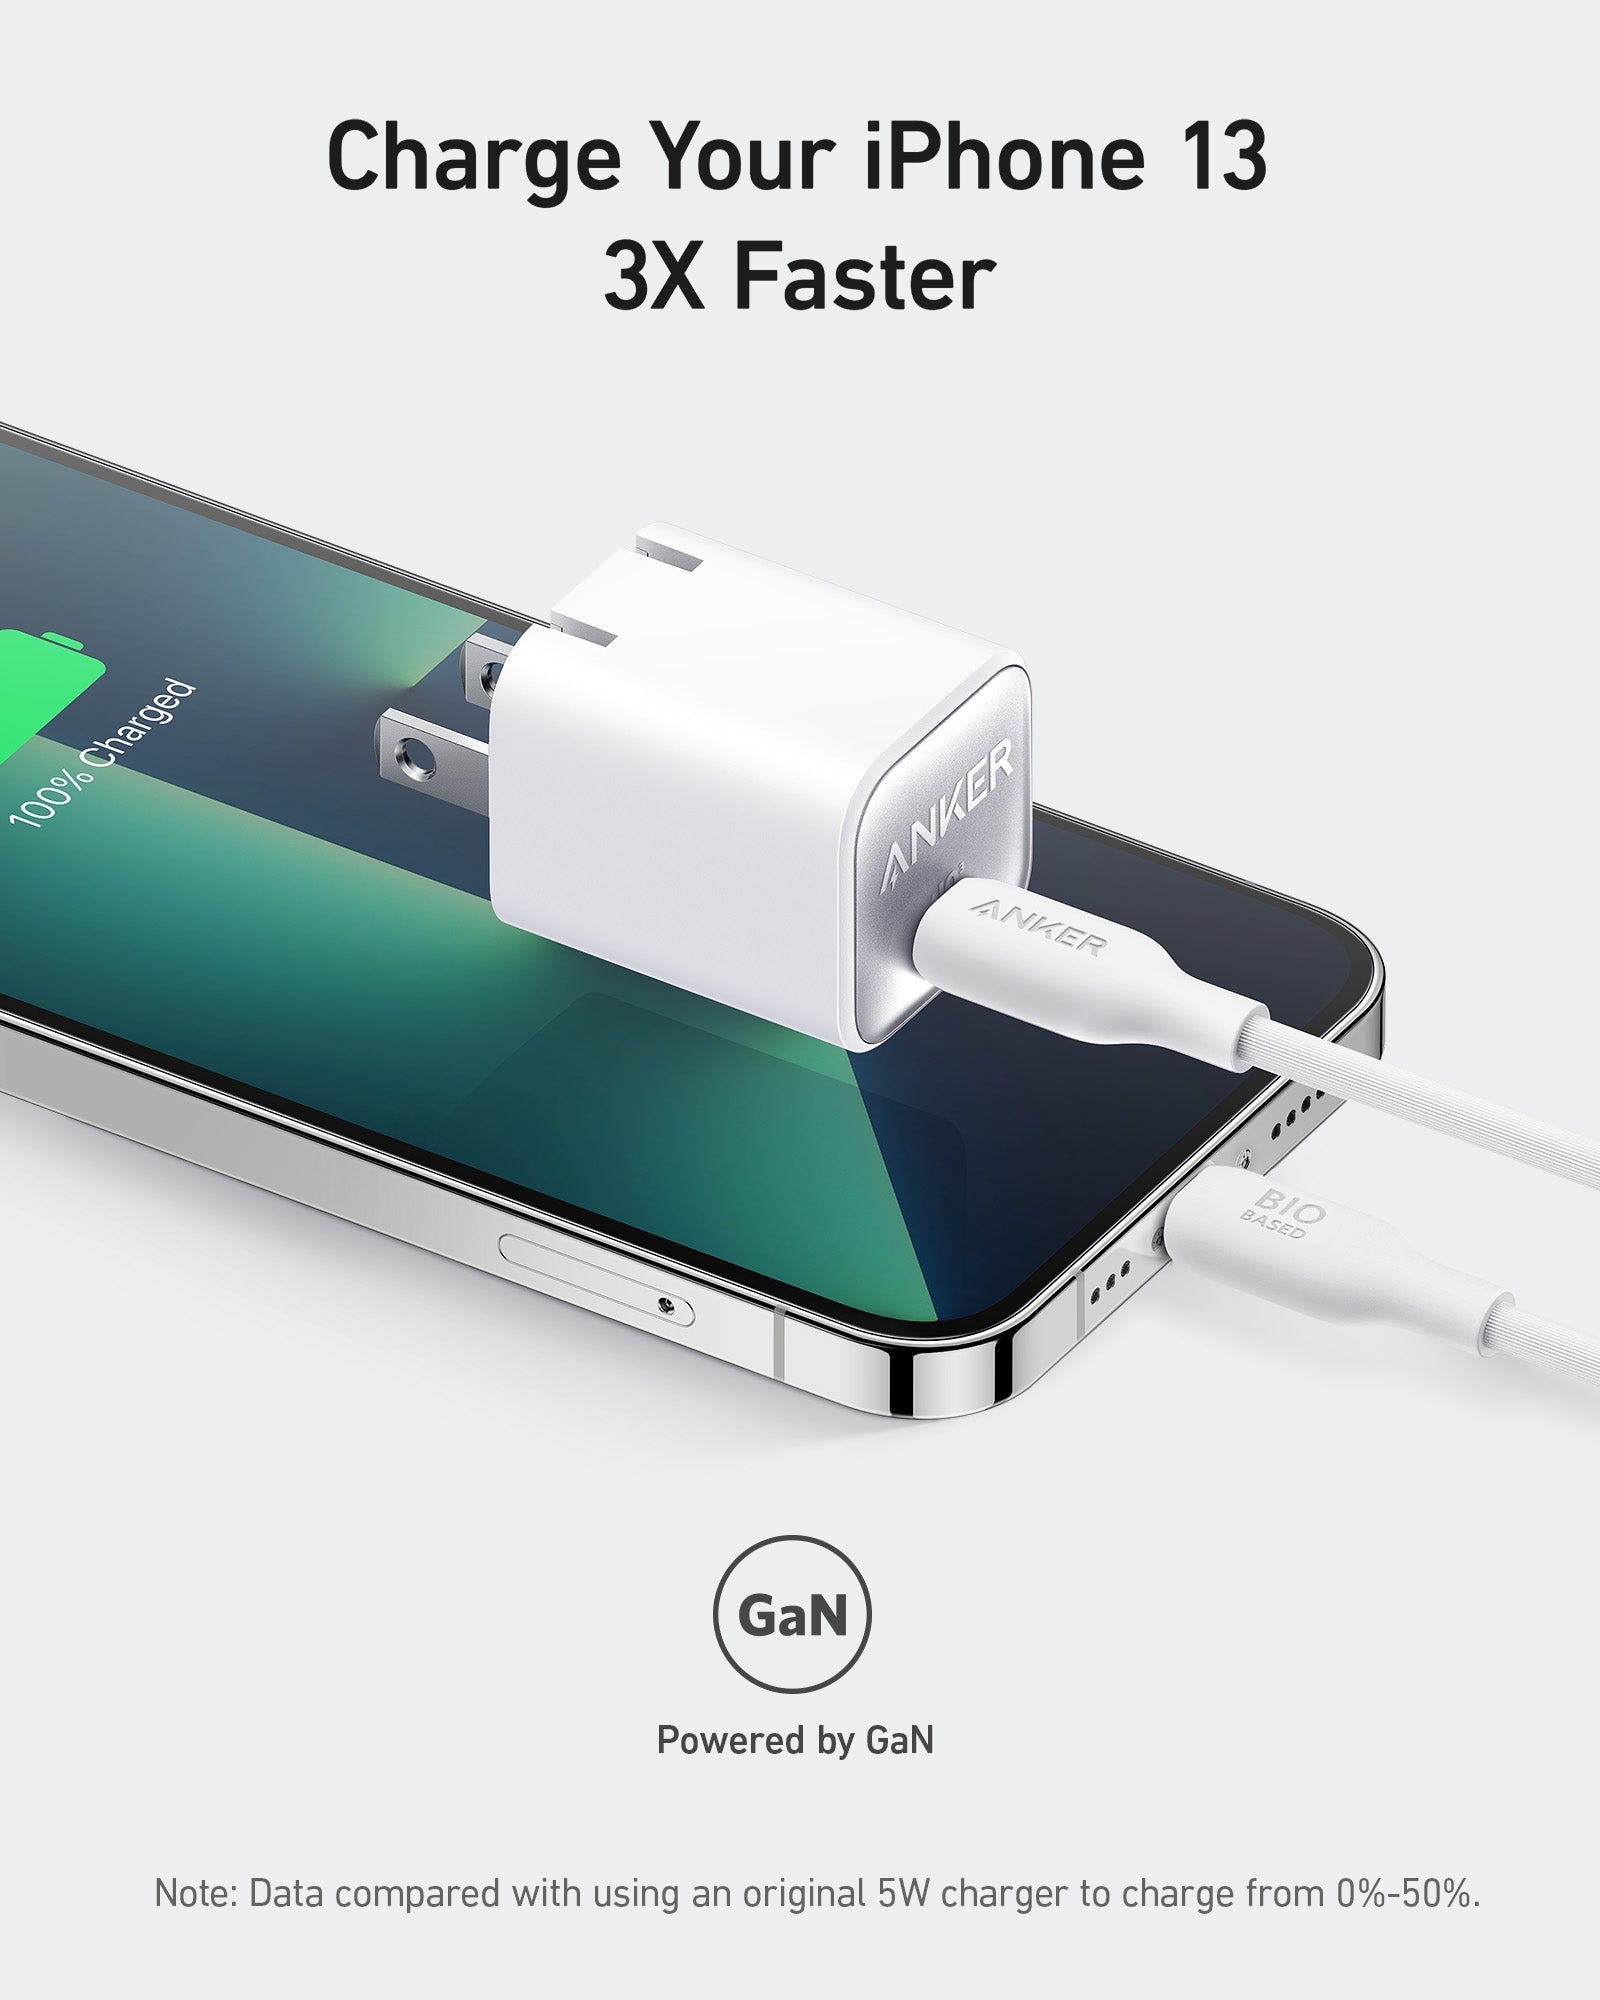 Anker's Nano 3 USB-C charger is even smaller, more colorful, and